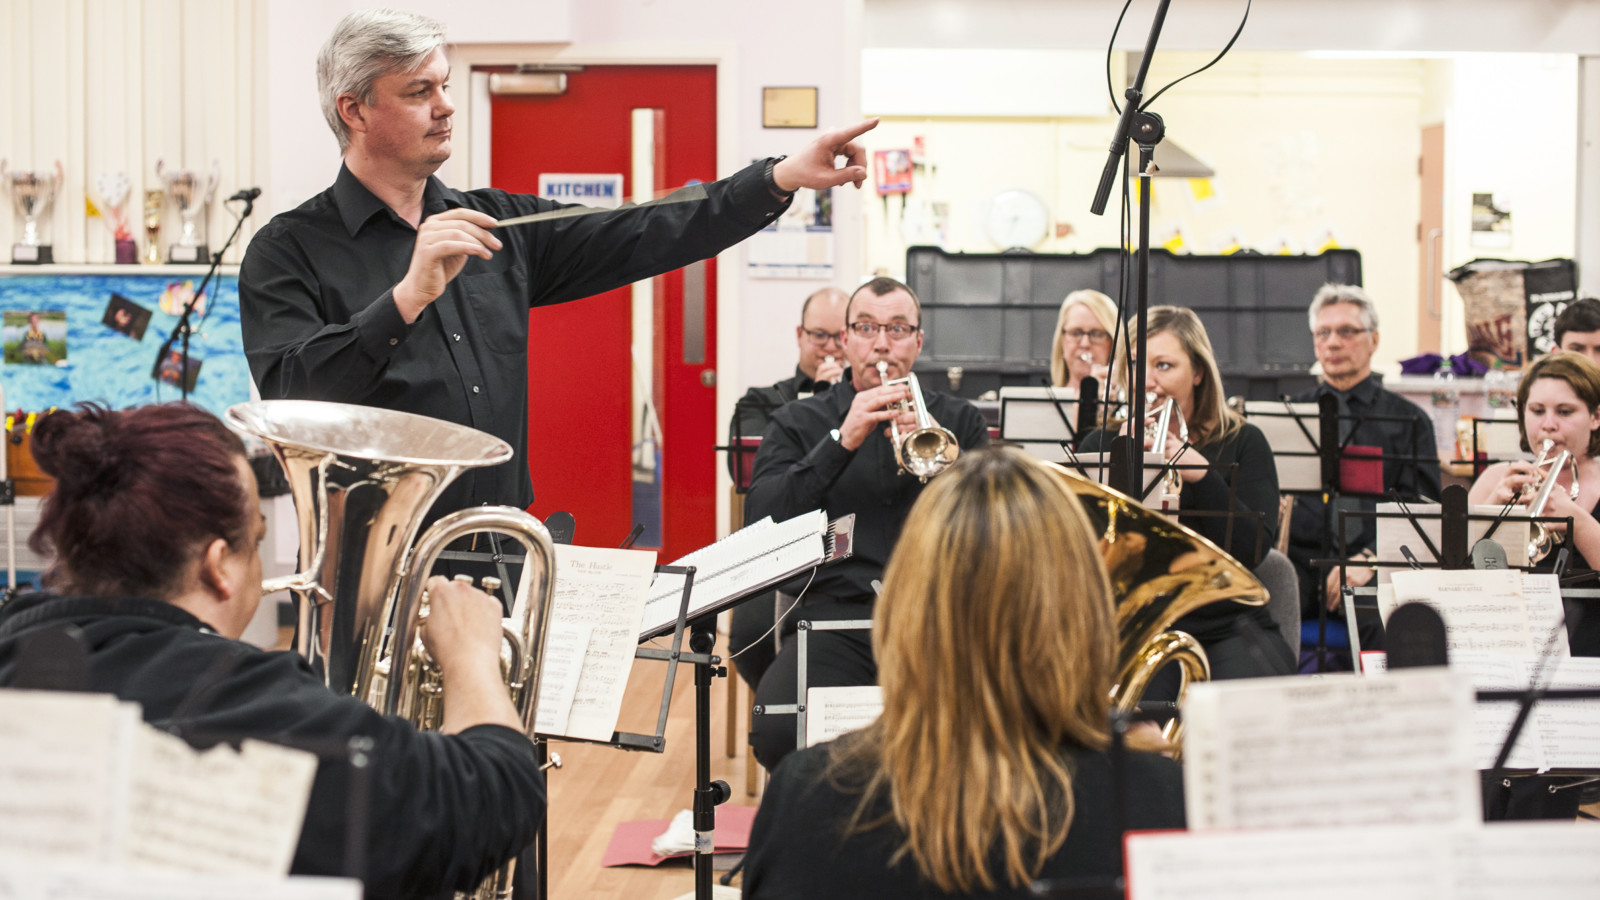 A person with short, light hair stands pointing with one hand and holding a conductor's baton in the other. They stand in a room in front of a number of people who are seated. The seated people are playing brass instruments. They have music stands with sheet music in front of them.